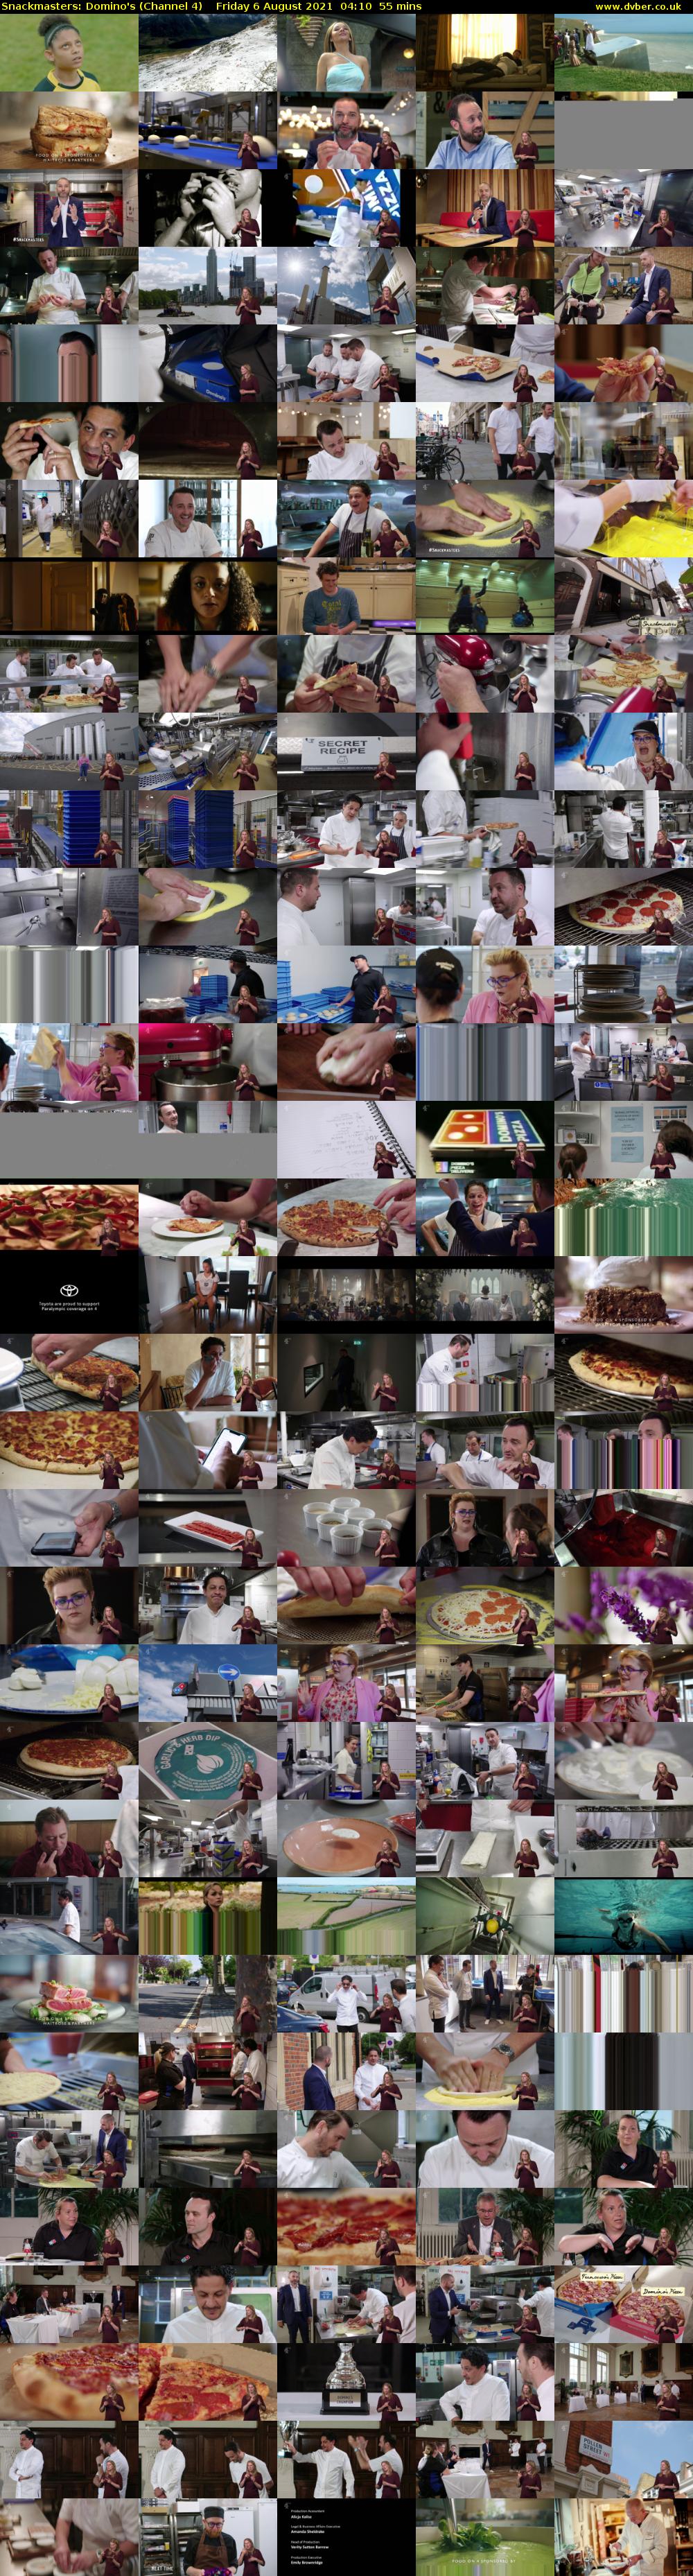 Snackmasters: Domino's (Channel 4) Friday 6 August 2021 04:10 - 05:05